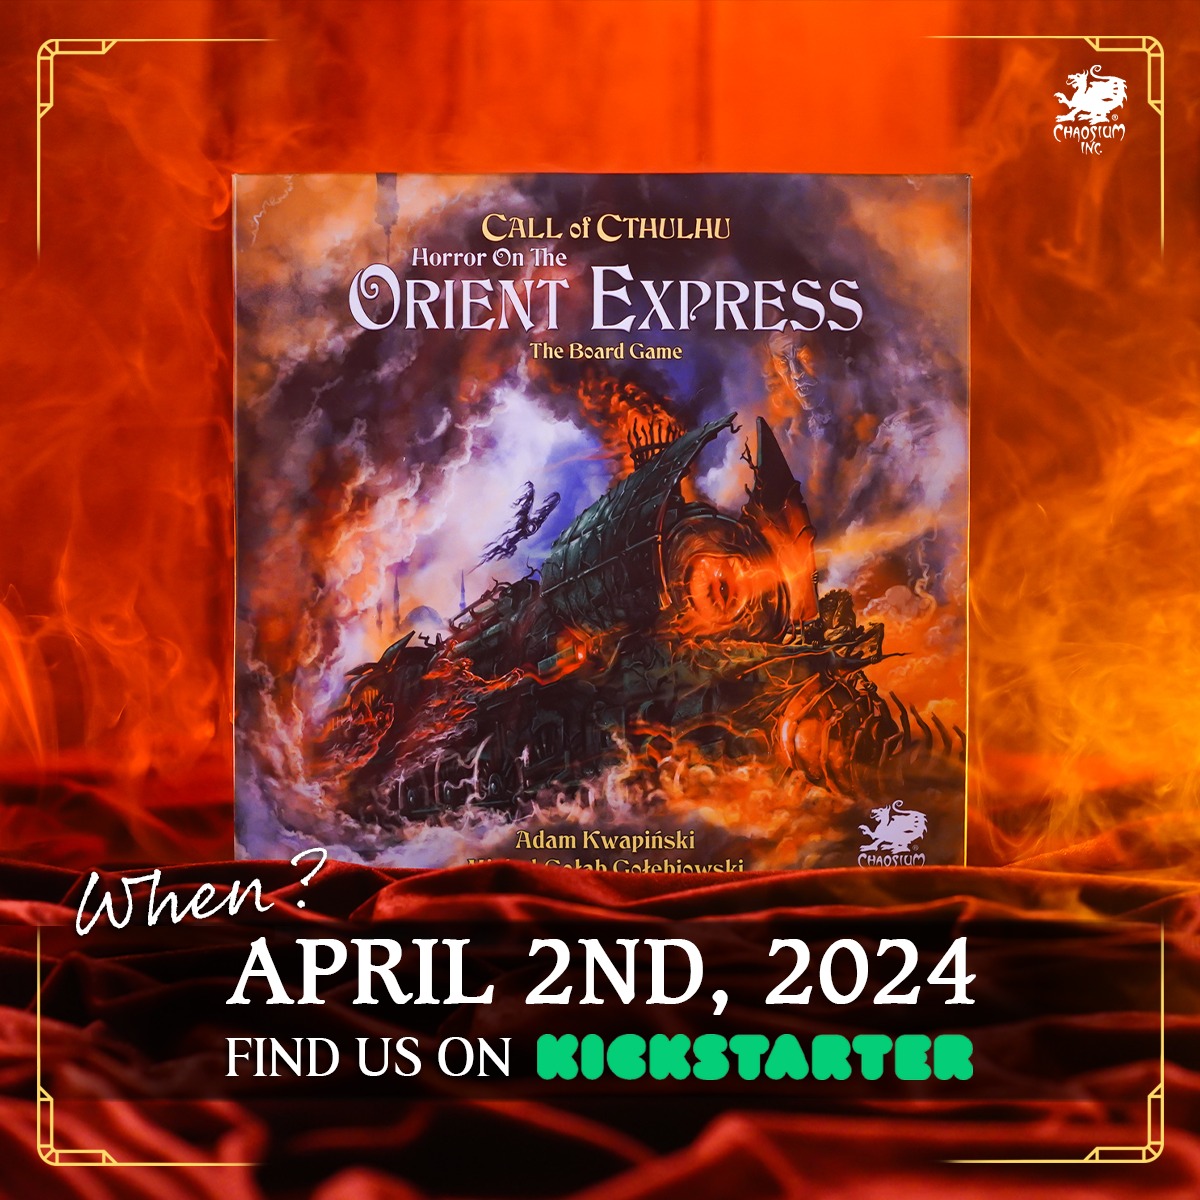 Horror on the Orient Express the Board launches April 2nd